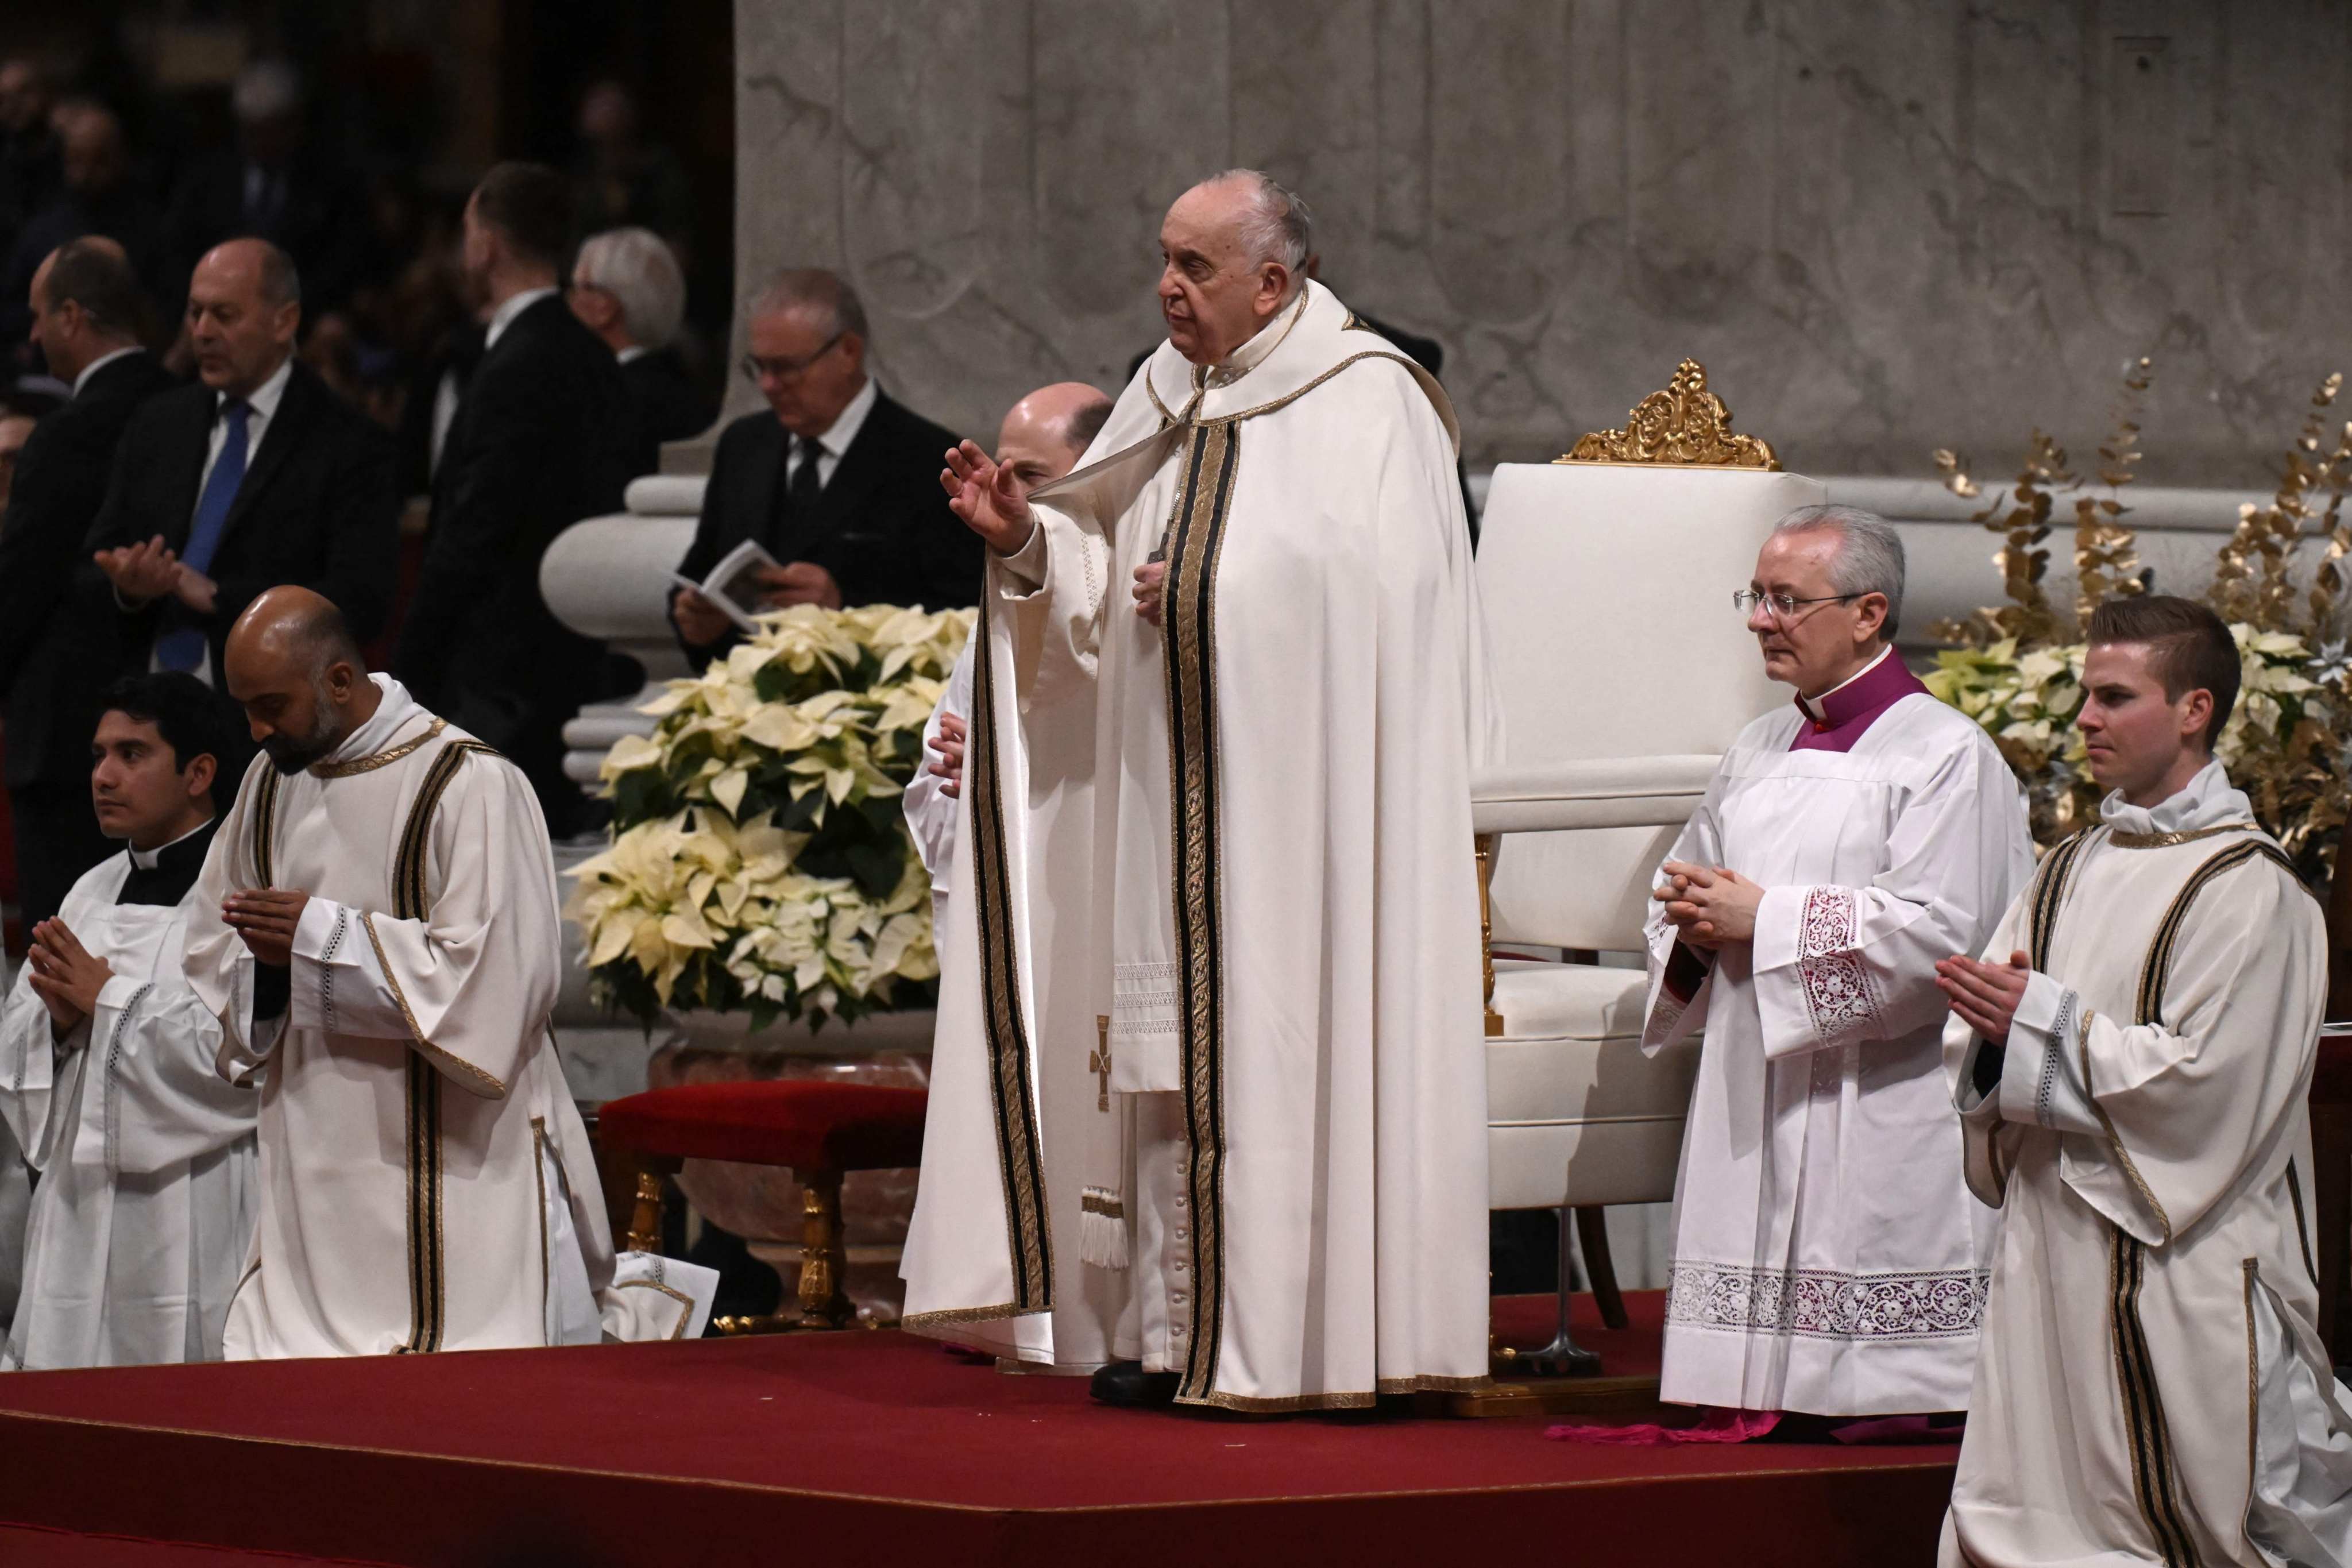 Pope Francis presides over the Christmas Eve mass at St Peter’s Basilica in the Vatican, Rome on Sunday. Photo: AFP